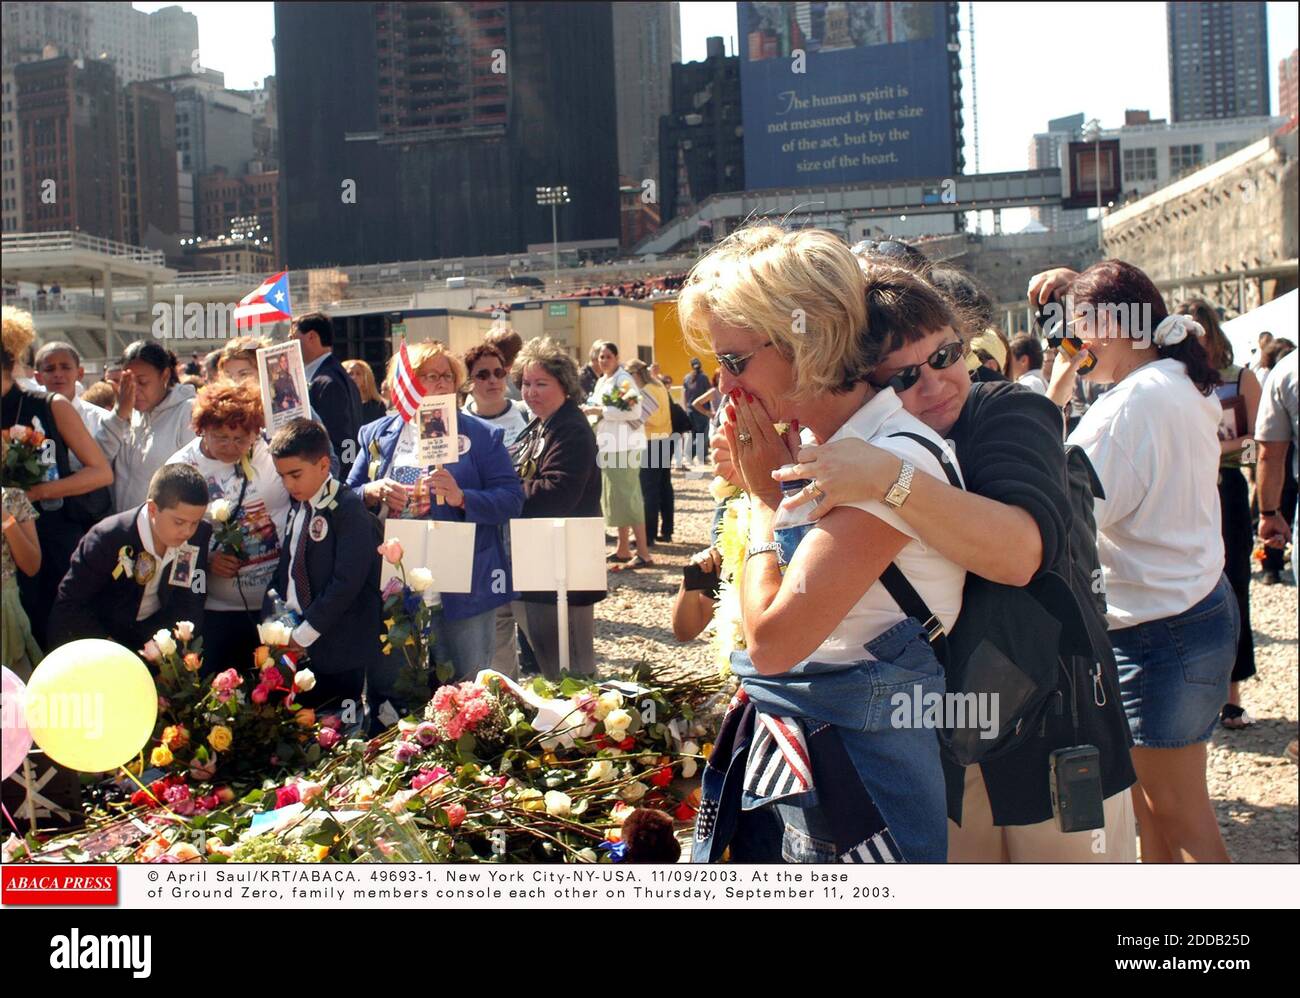 NO FILM, NO VIDEO, NO TV, NO DOCUMENTARY - © April Saul/KRT/ABACA. 49693-1. New York City-NY-USA. 11/09/2003. At the base of Ground Zero, family members console each other on Thursday, September 11, 2003. Stock Photo